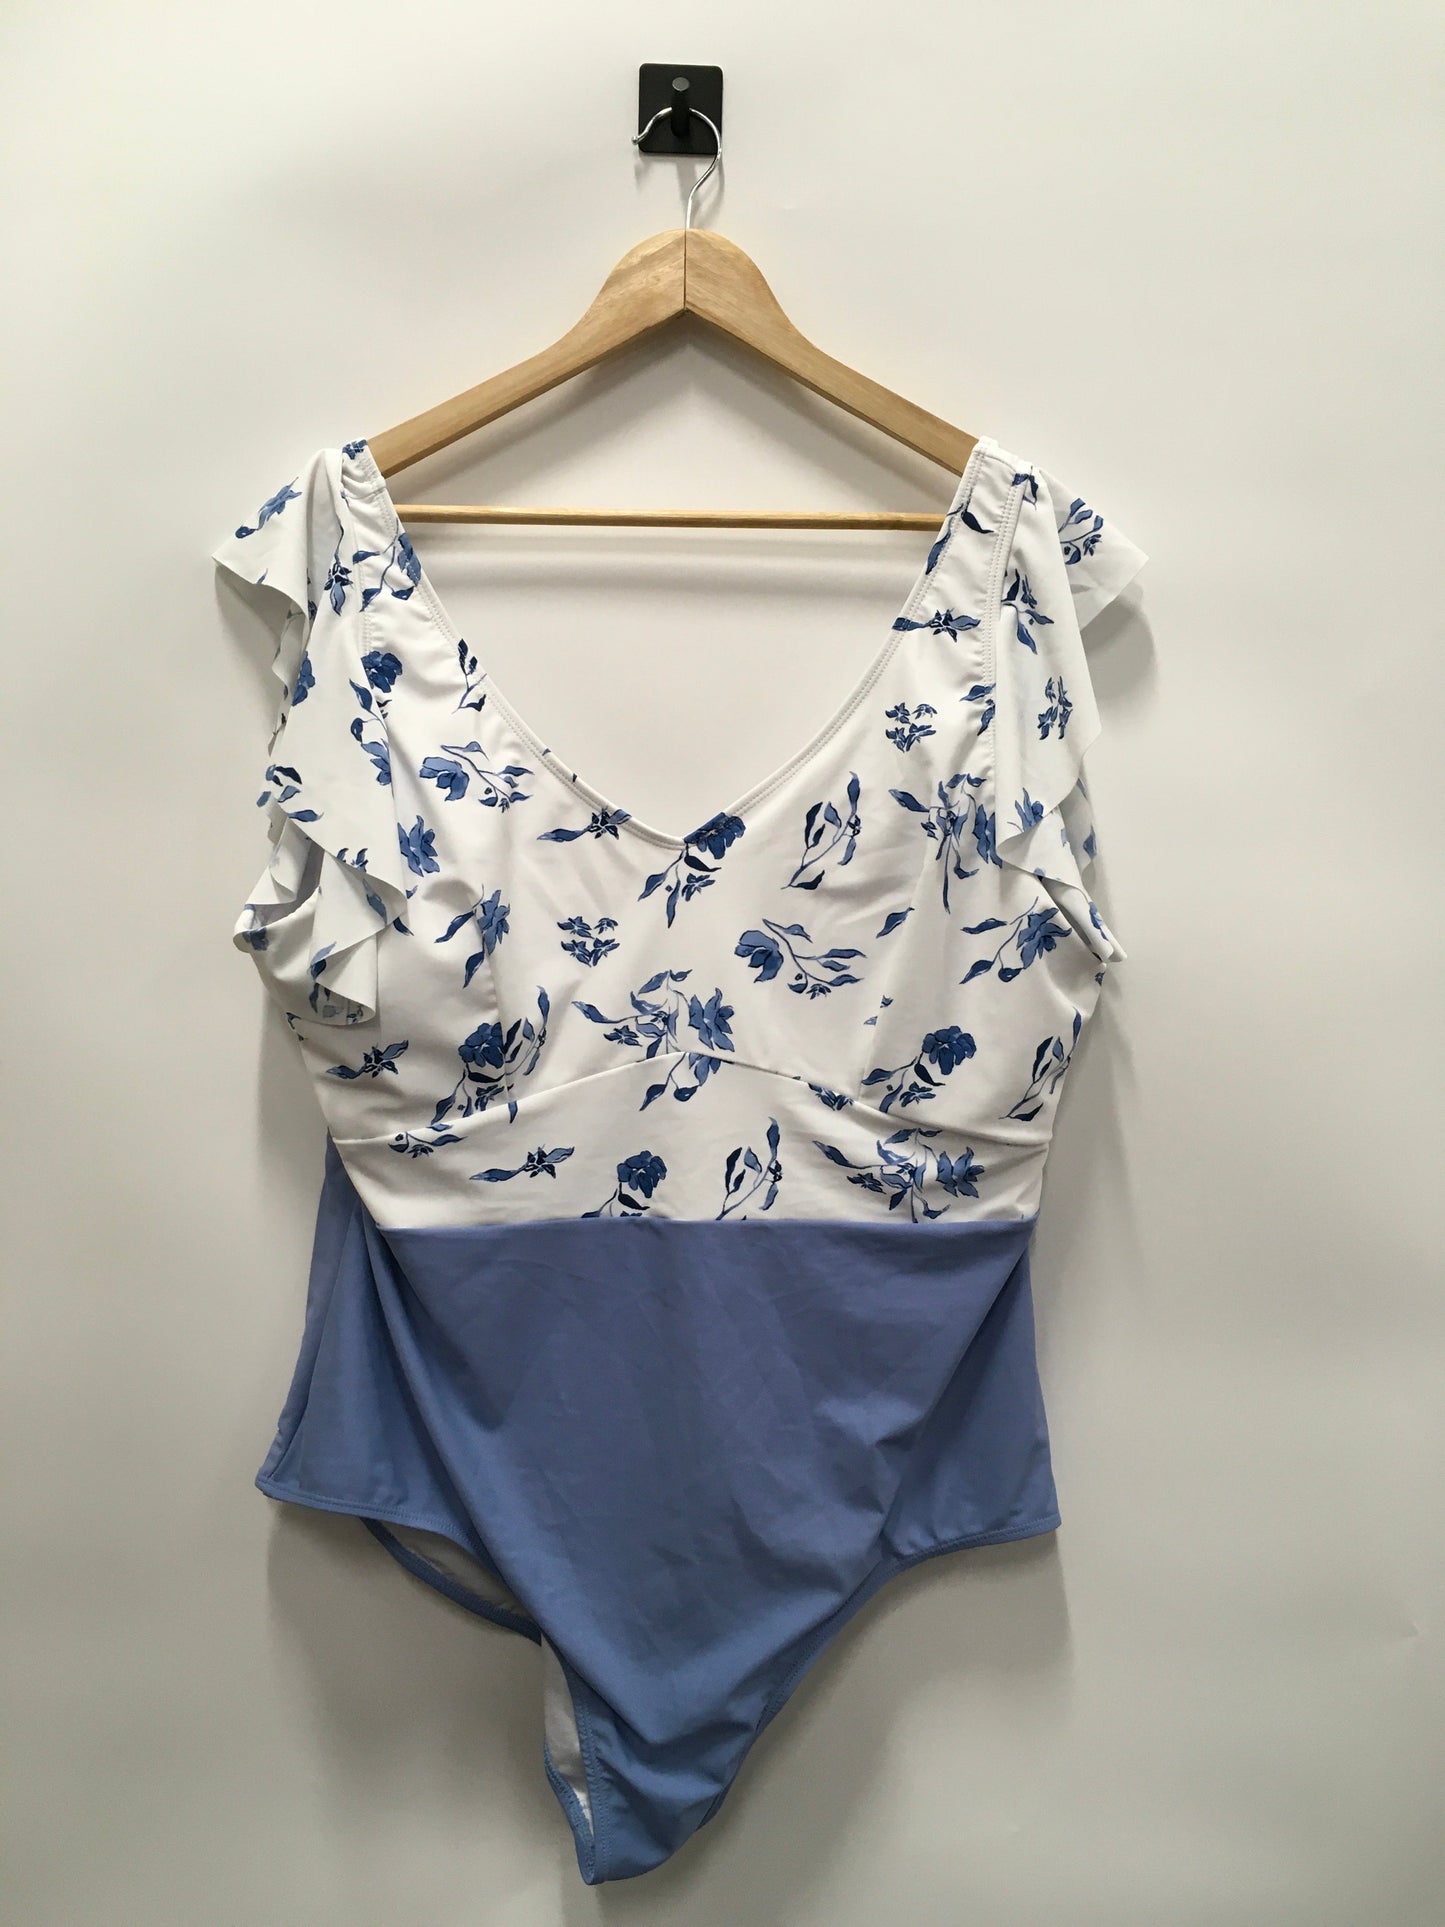 Blue & White Swimsuit CORAL REEF SWIM -   Size 3x